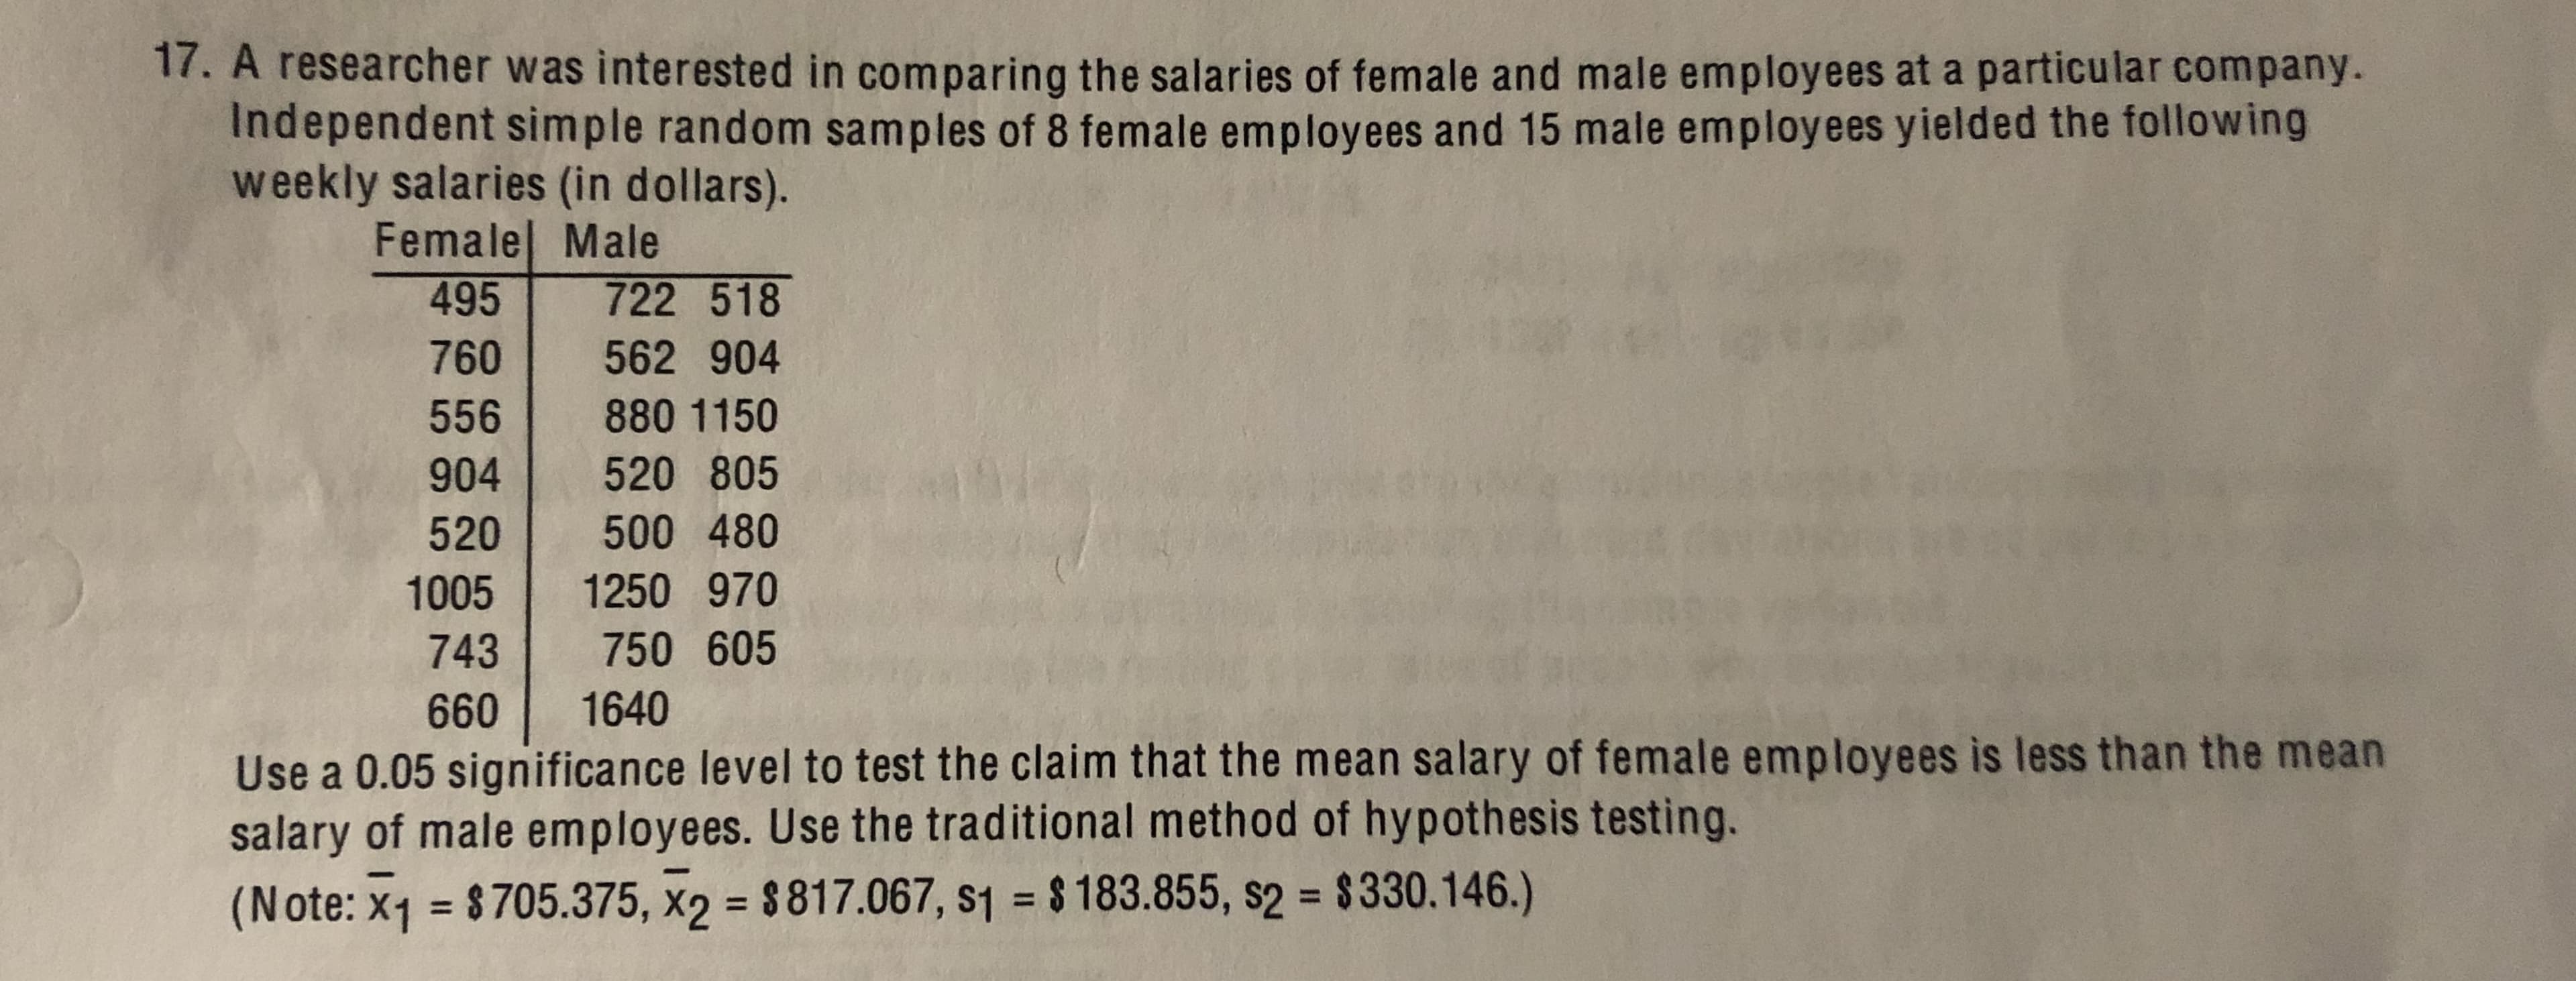 17. A researcher was interested in comparing the salaries of female and male employees at a particular company.
Independent simple random samples of 8 female employees and 15 male employees yielded the following
weekly salaries (in dollars).
Femalel Male
722 518
495
760
562 904
880 1150
556
520 805
904
500 480
520
1250 970
1005
750 605
743
1640
660
Use a 0.05 significance level to test the claim that the mean salary of female employees is less than the mean
salary of male employees. Use the traditional method of hypothesis testing.
(Note: x1 = 8705.375, x2 = $817.067, s1 = $ 183.855, s2 = $330.146.)
%3D
%3D
%3D
%3D
